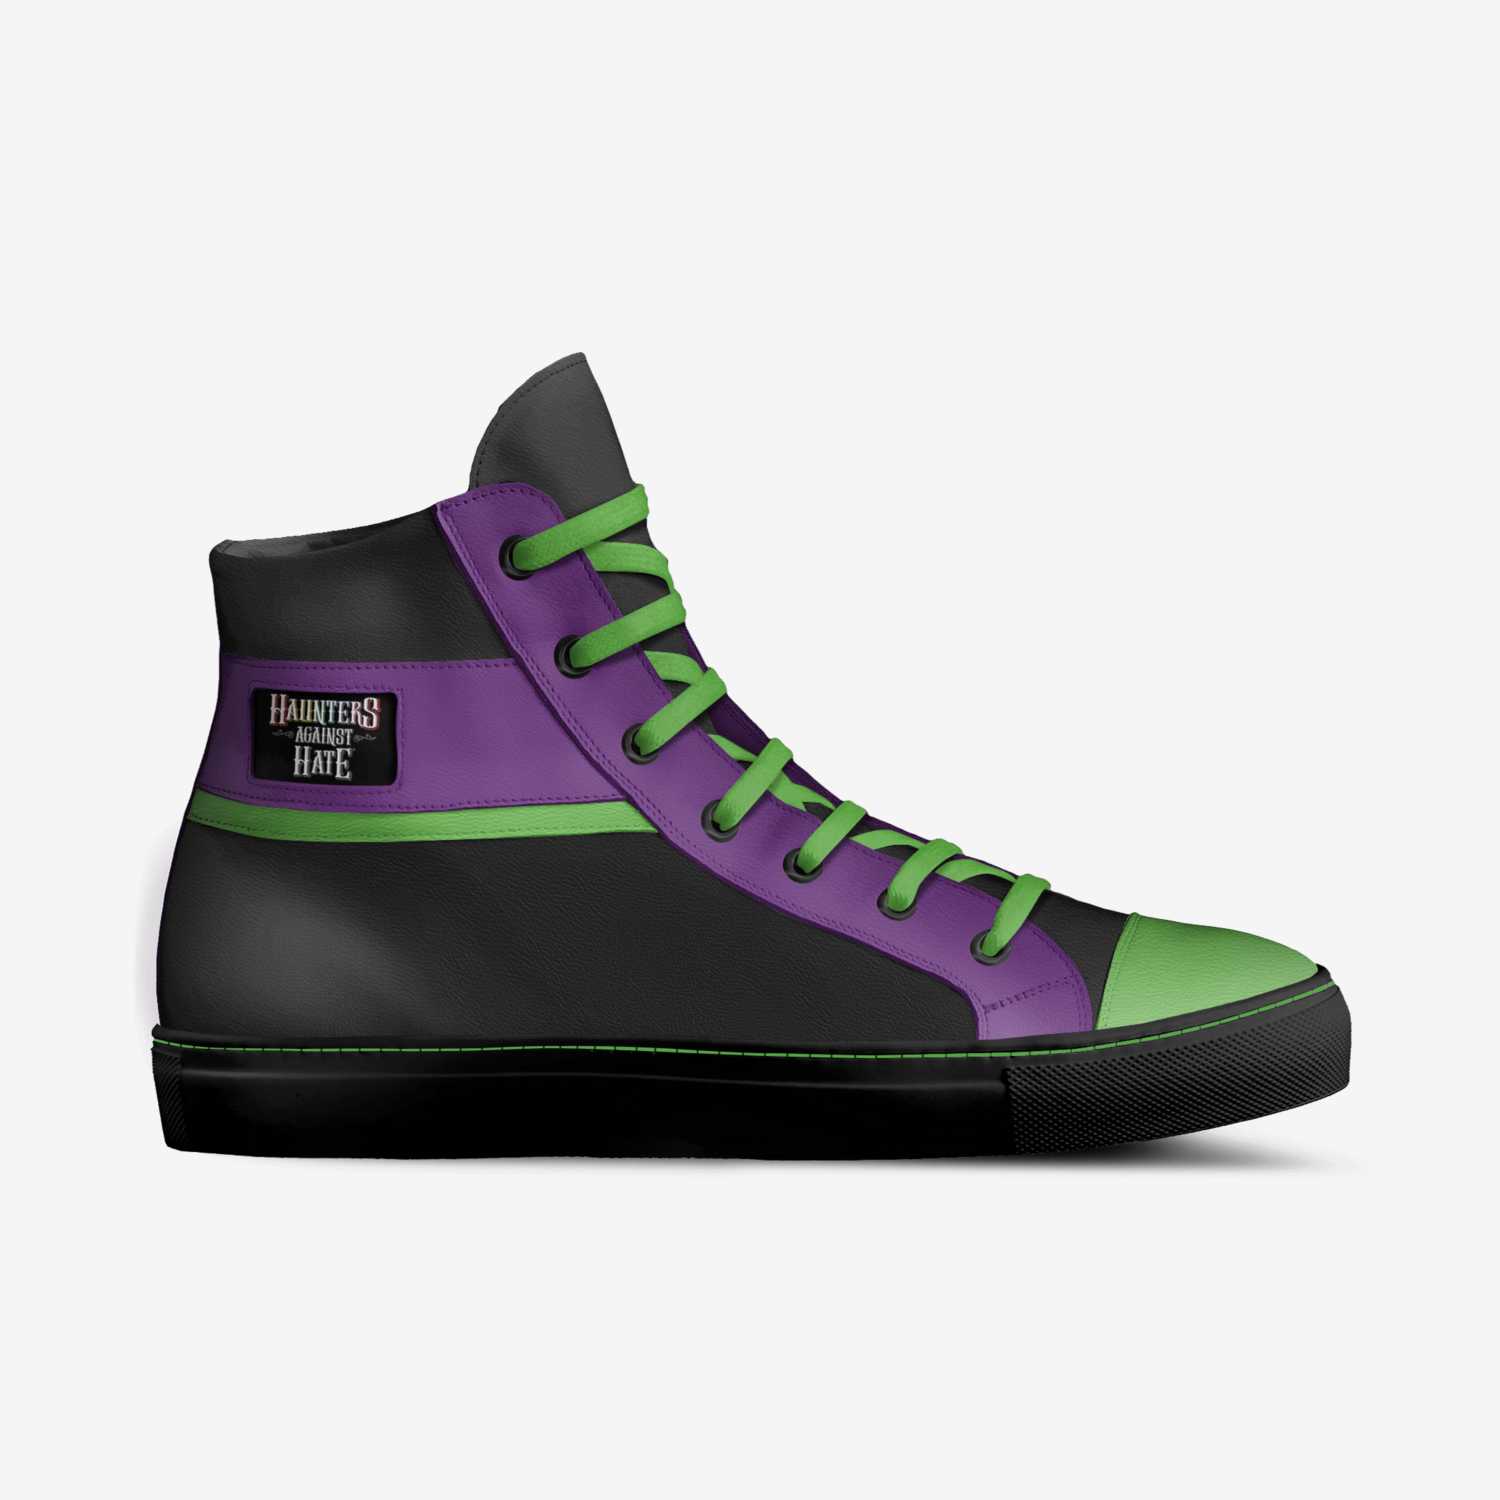 HauntersAgainstH8 custom made in Italy shoes by Paul Lanner | Side view